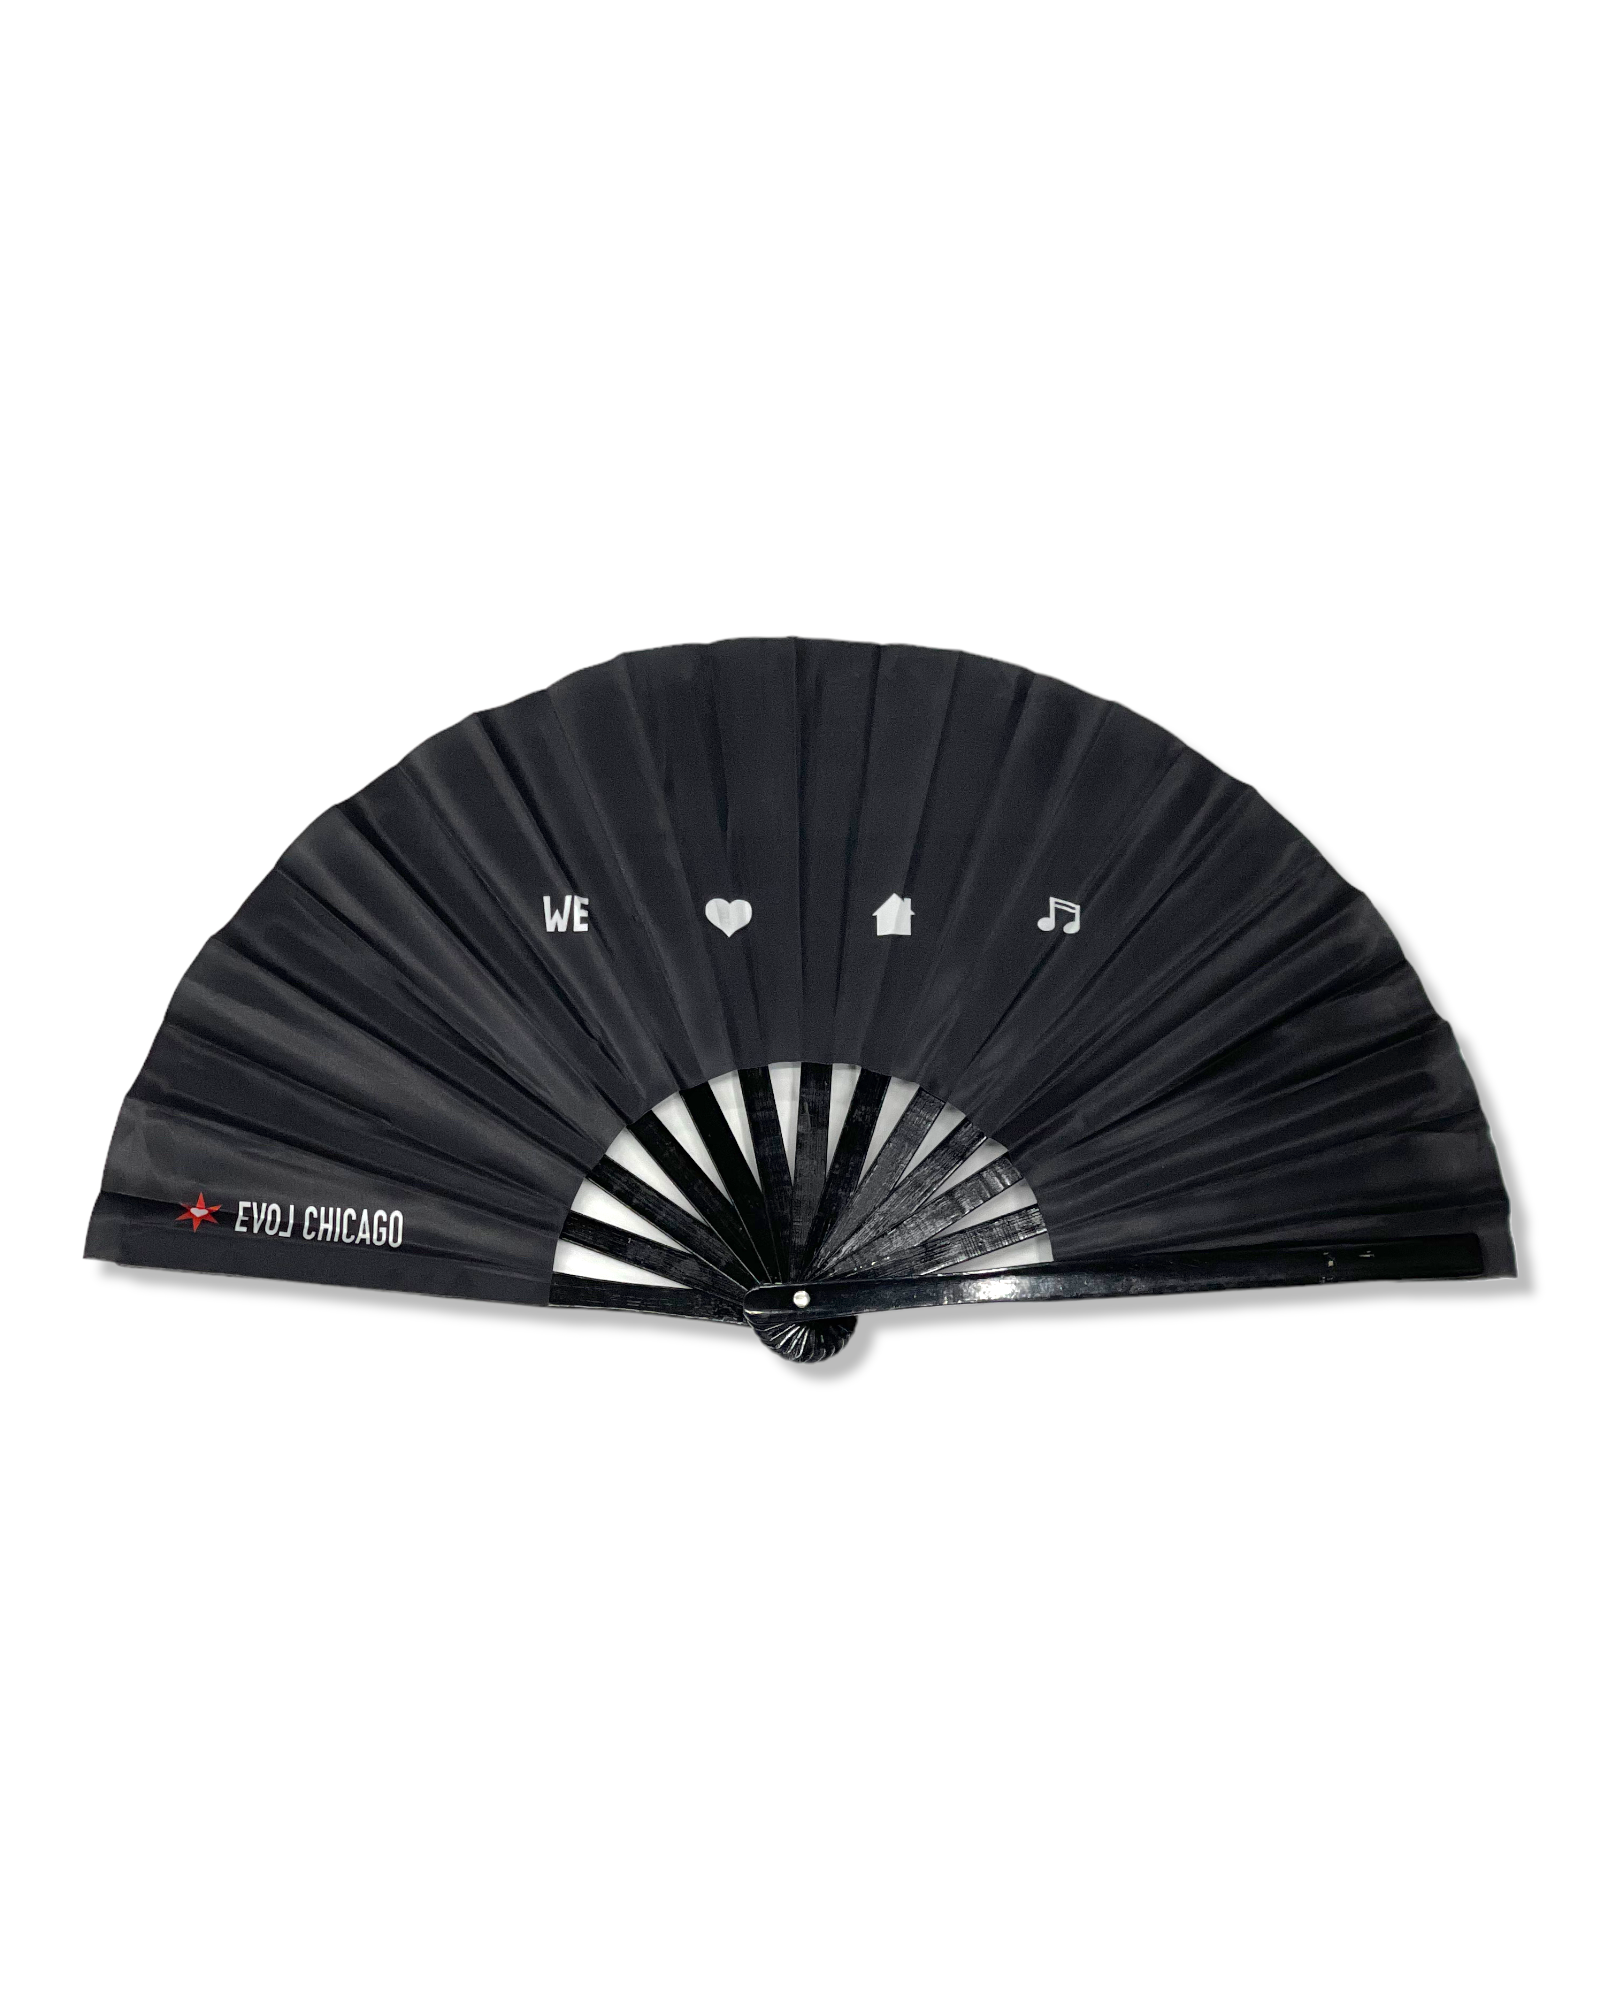 Midnight WLHM Hand Fan